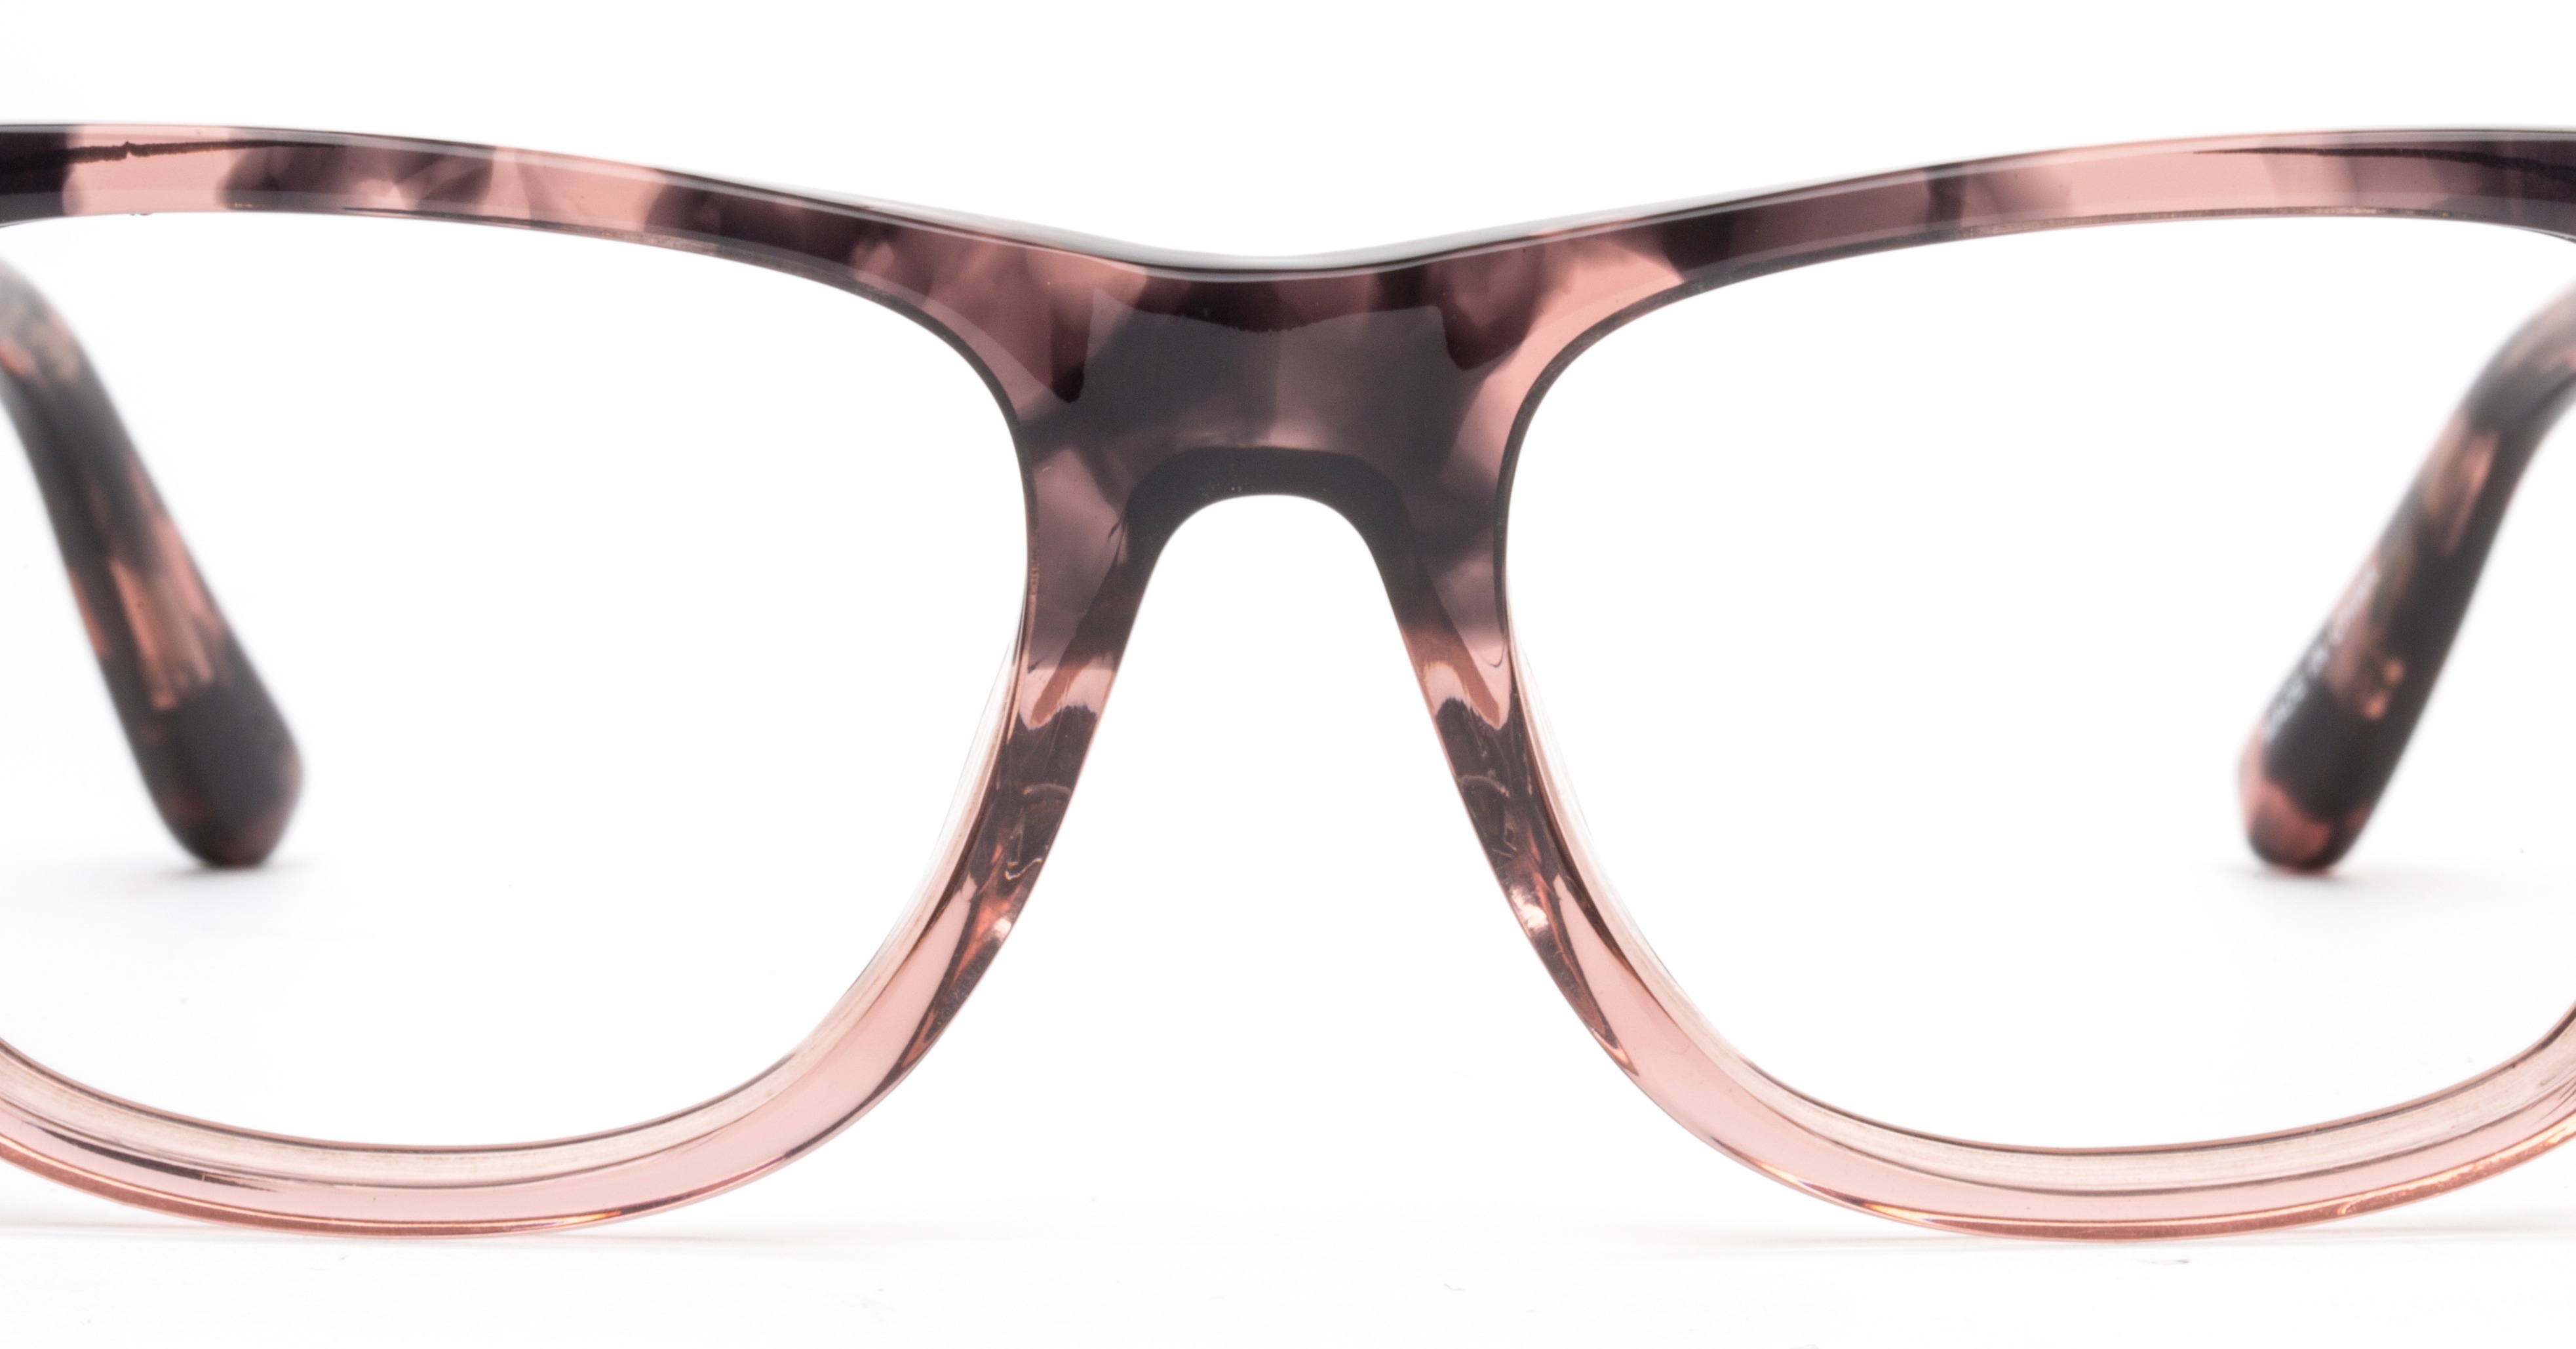 The New Glasses | 8 Stylish Updates to Your Childhood Back-to-School